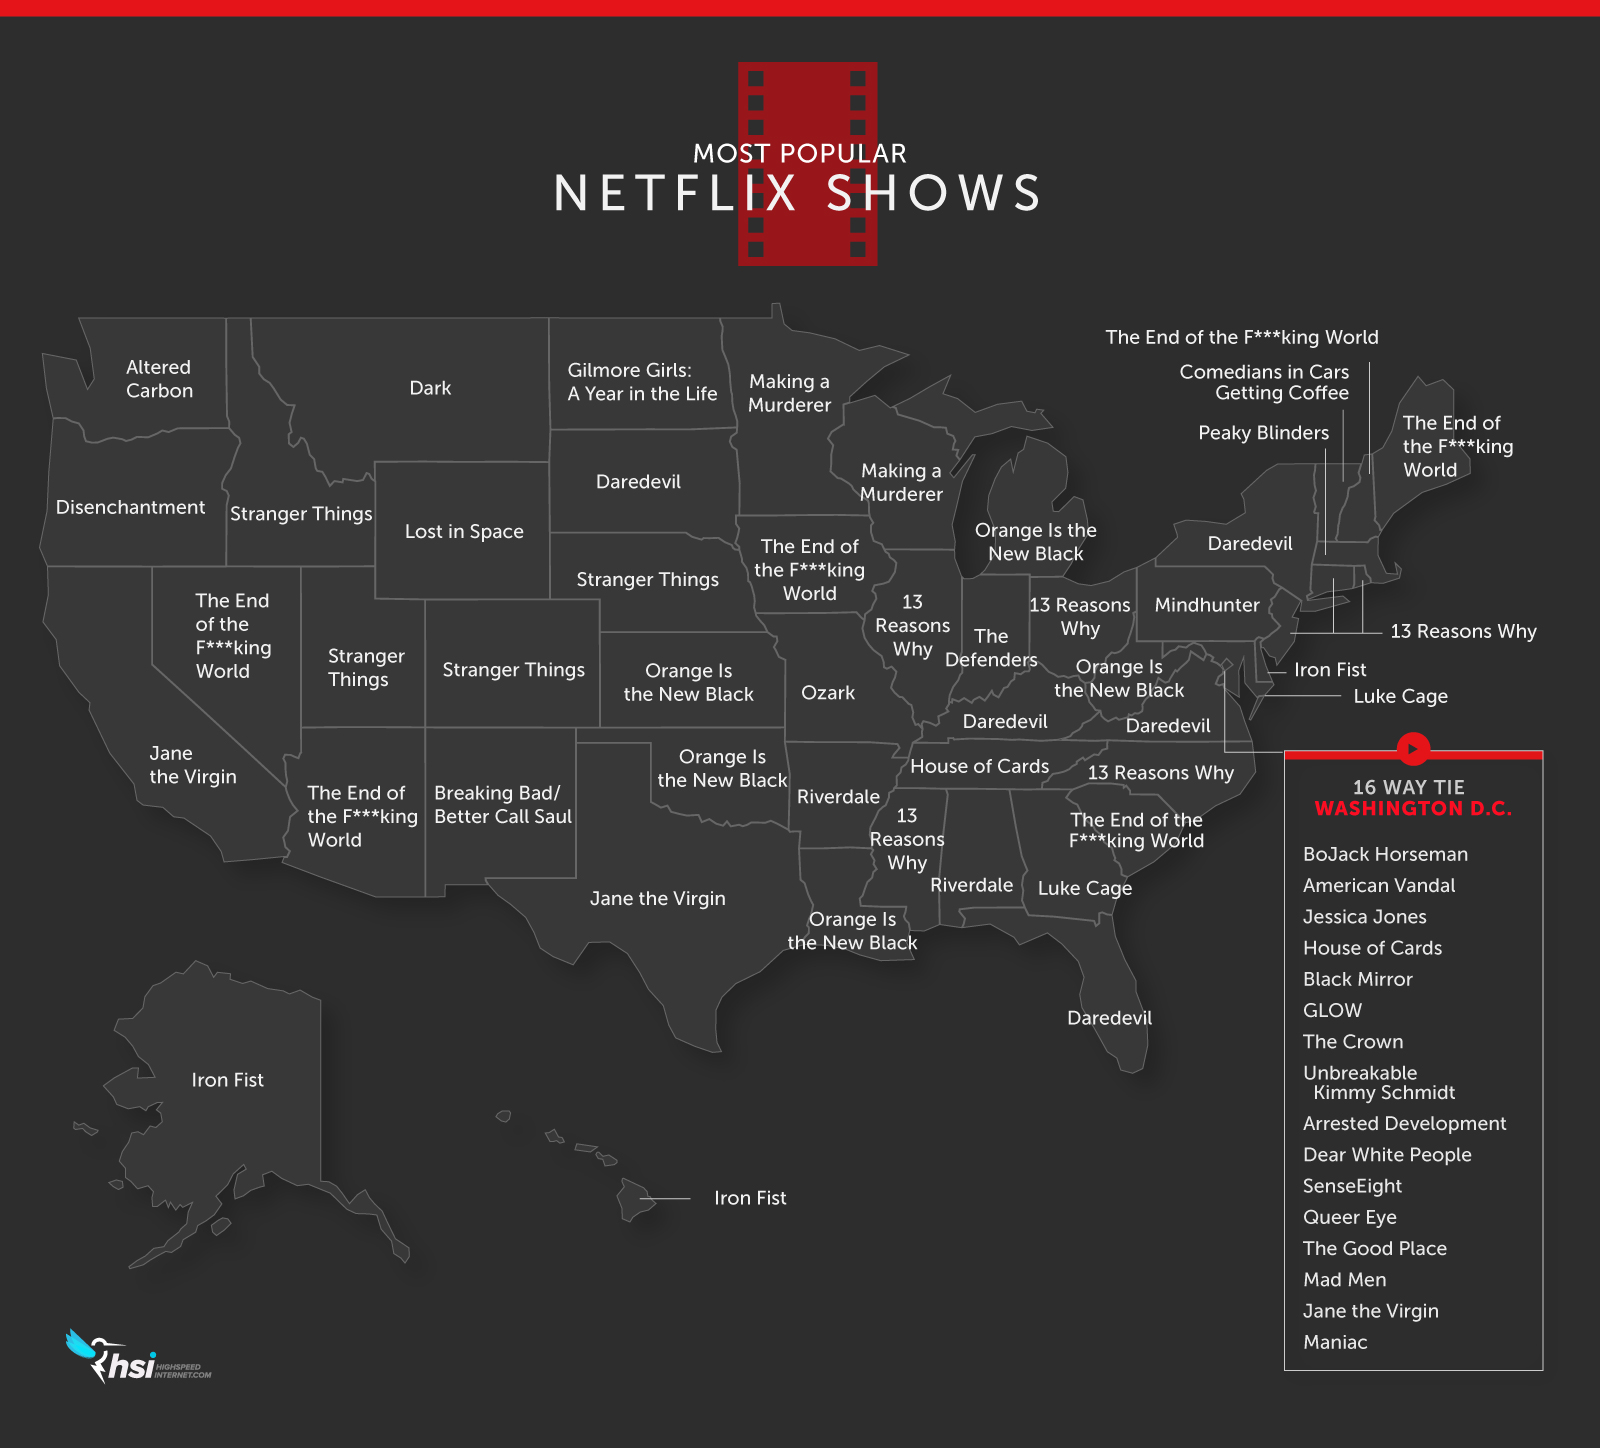 Map of the top Netflix shows by state